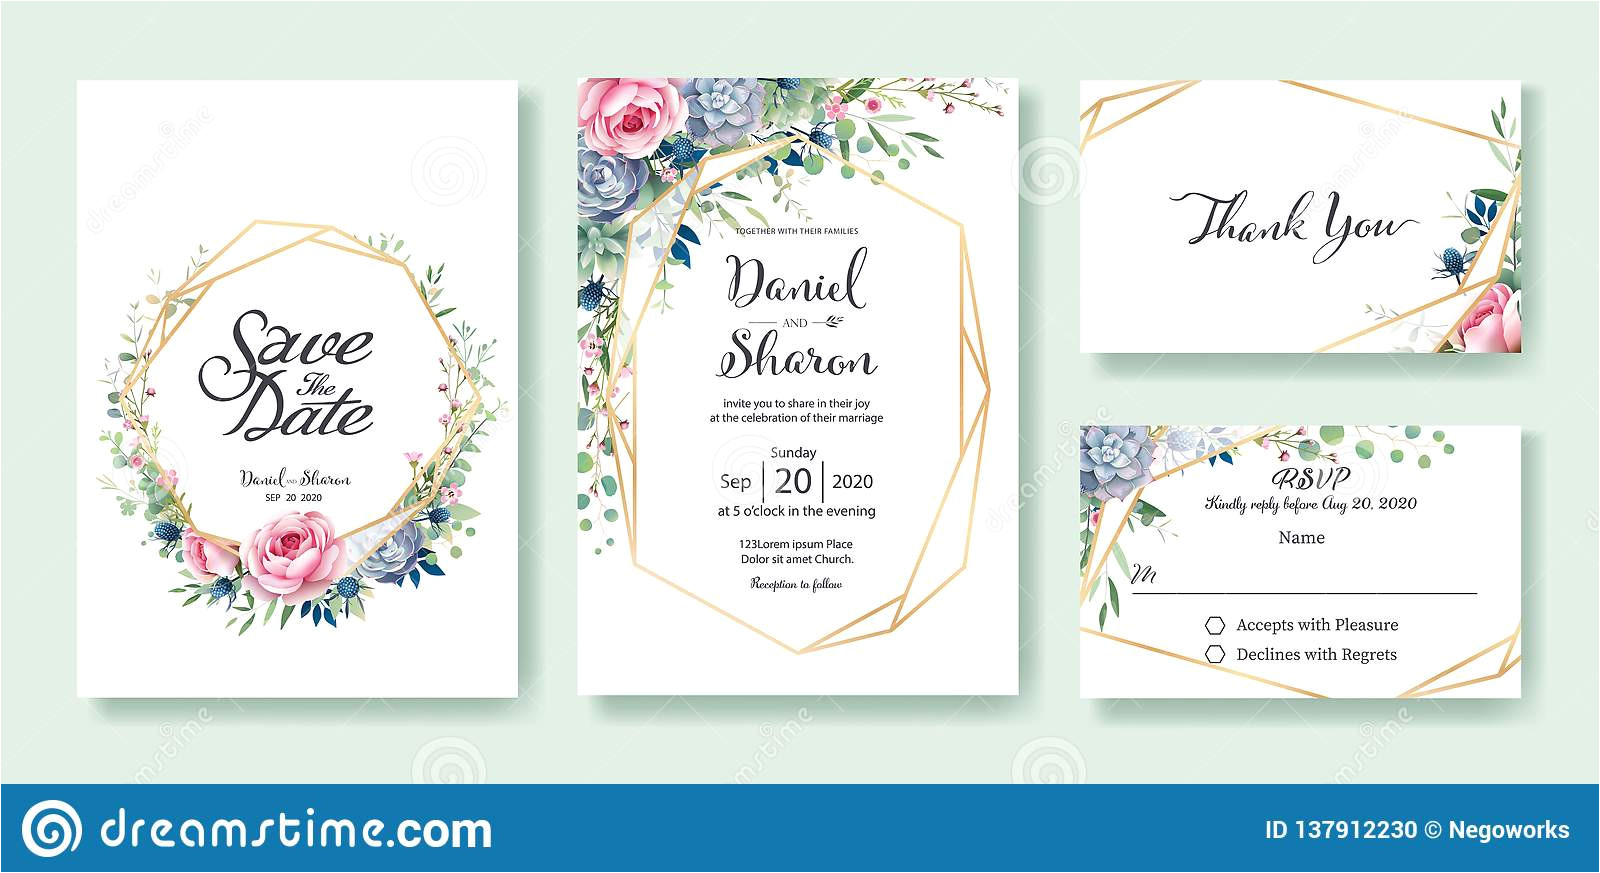 wedding invitation save date thank you rsvp card design template queen sweden rose flower leaves succulent plant anemone image137912230